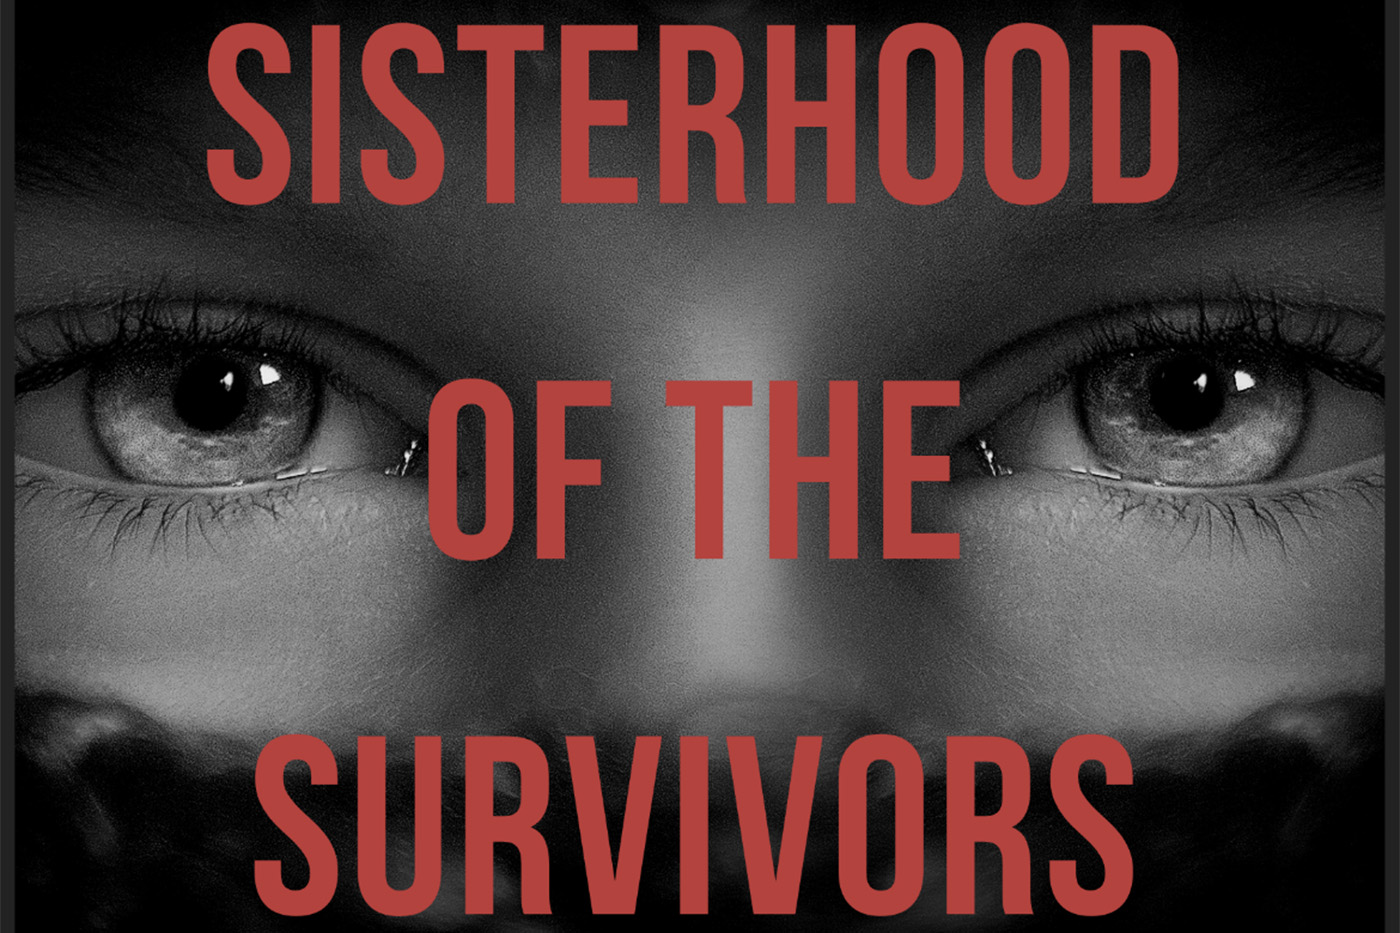 A black and white image of a person's face covered in red text: "Sisterhood of the Survivors".